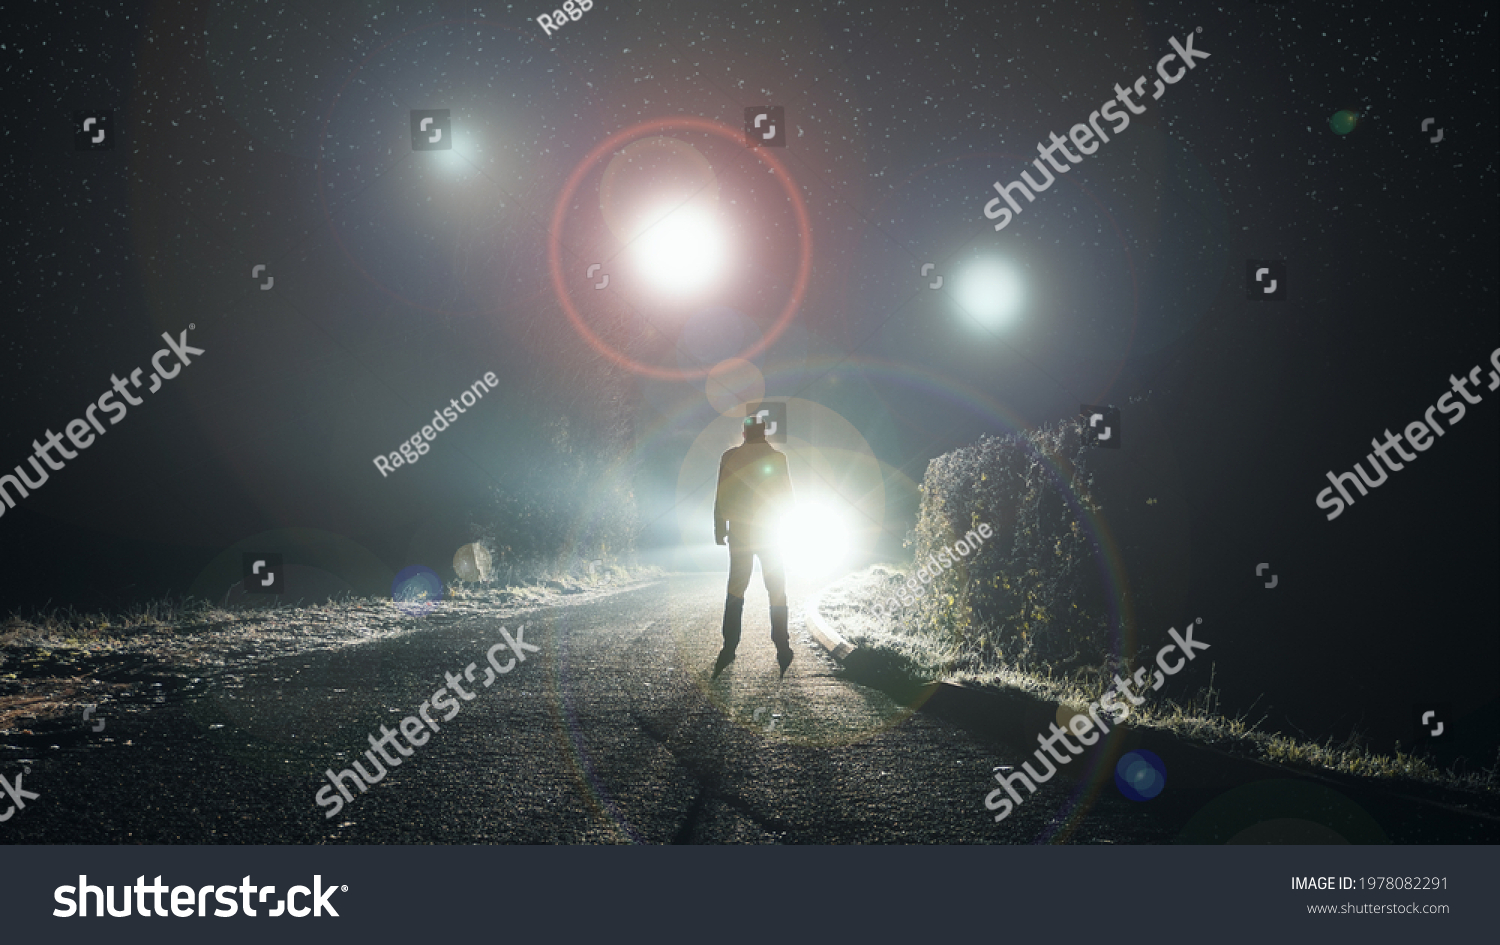 UFO concept. Glowing orbs, floating above a misty road at night. With a silhouetted figure looking at the lights.                #1978082291